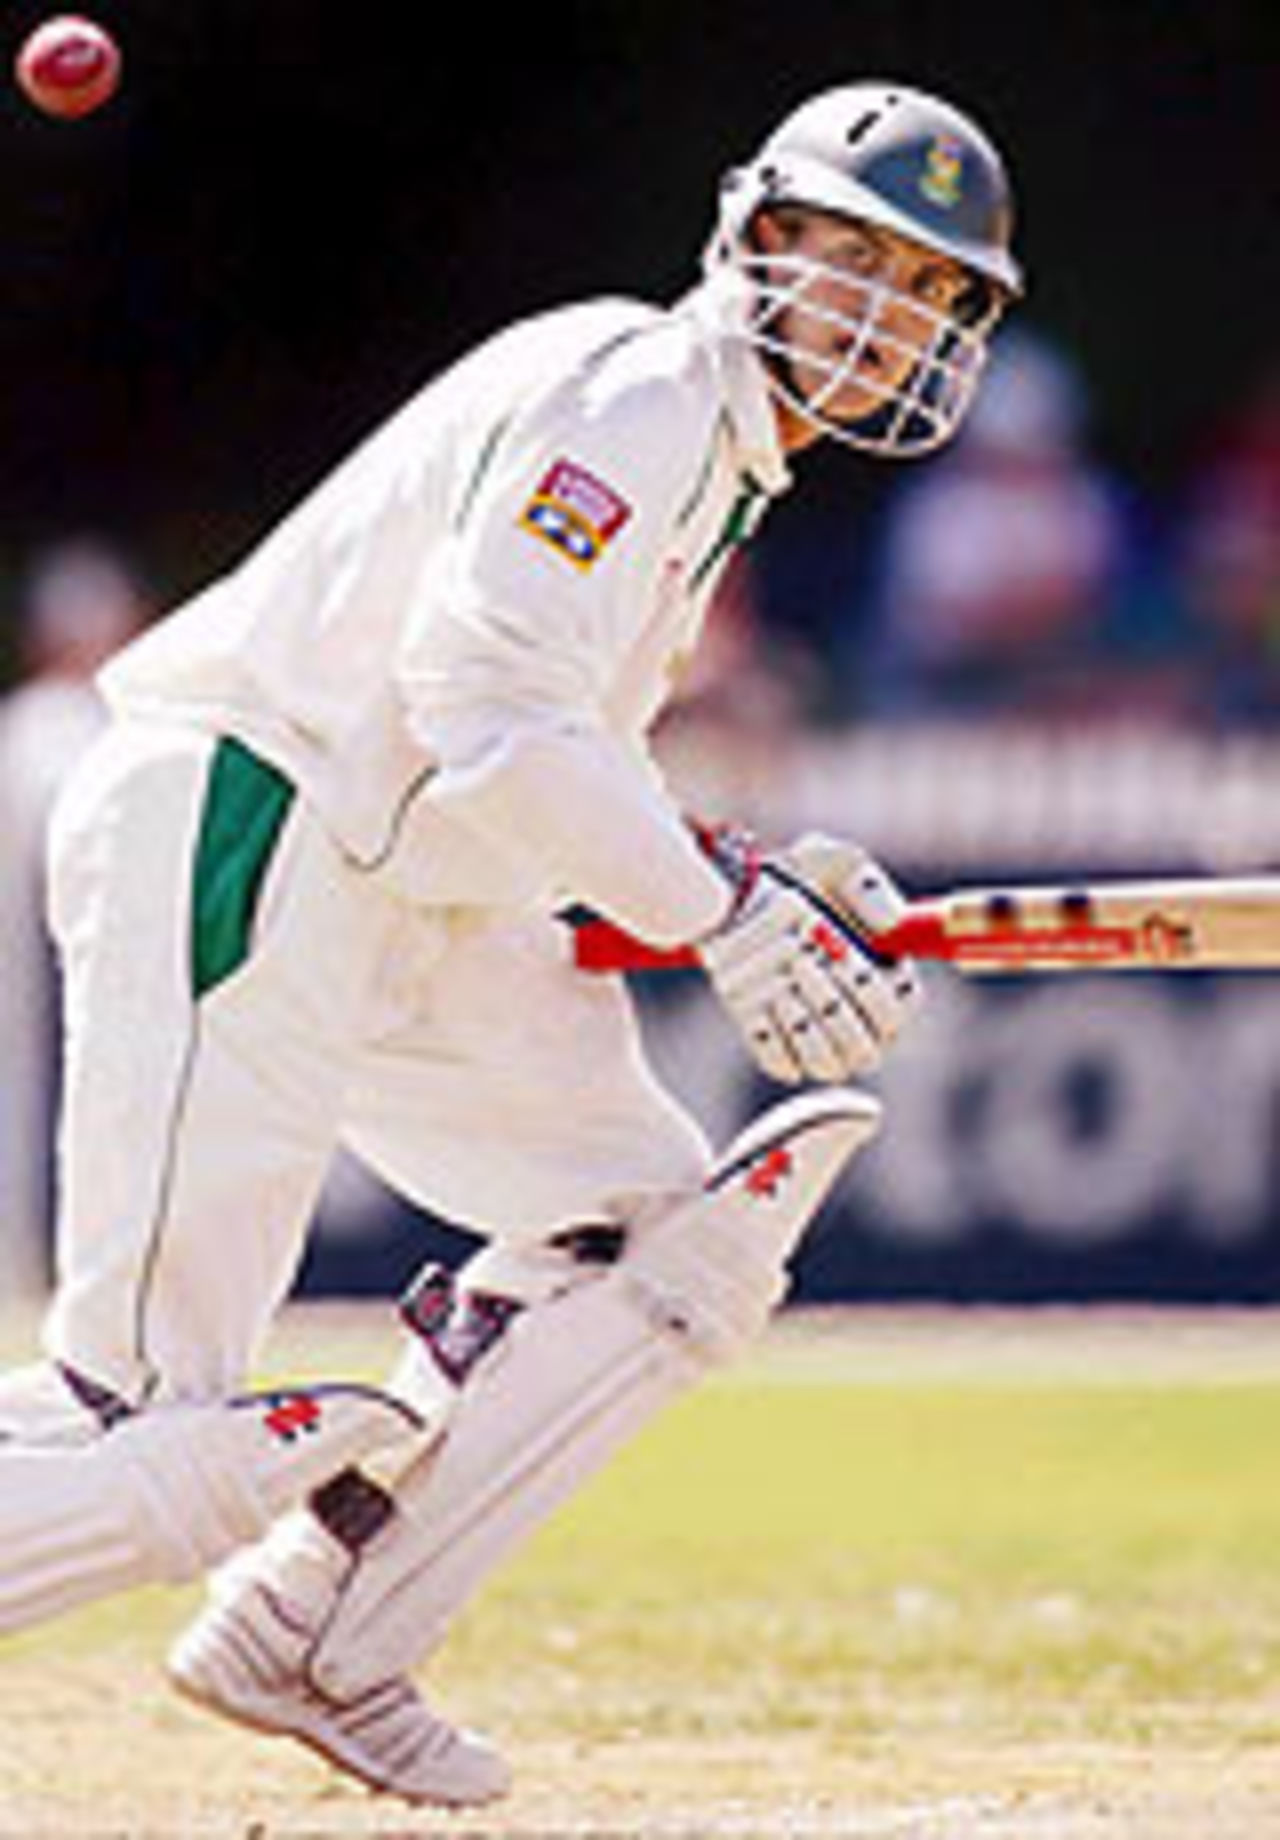 Jacques Rudolph in action, New Zealand v South Africa, 1st Test, Hamilton, 1st day, March 10, 2004